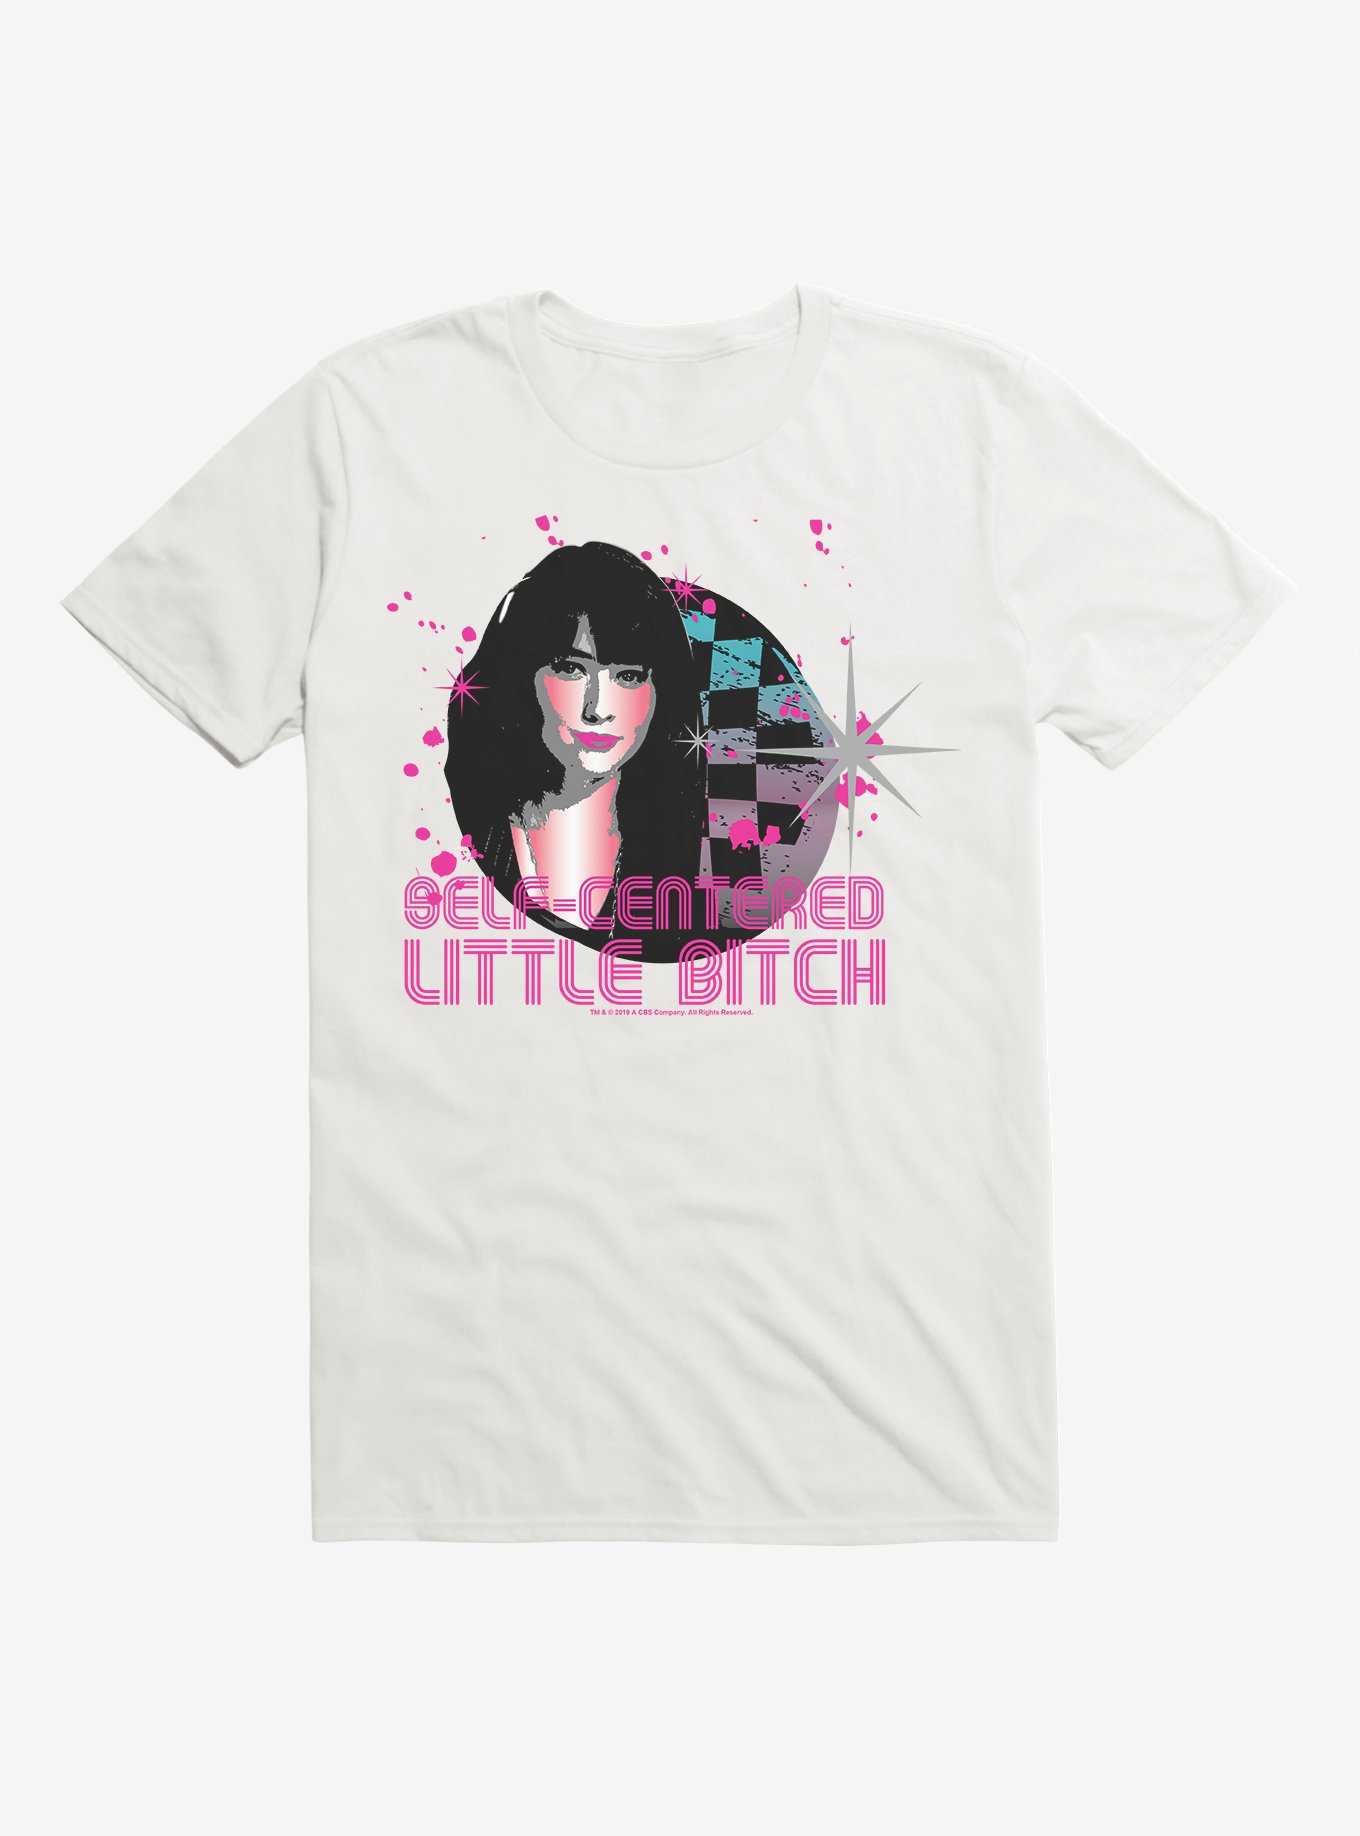 OFFICIAL 90210 T-Shirts & Hot Topic | Merch